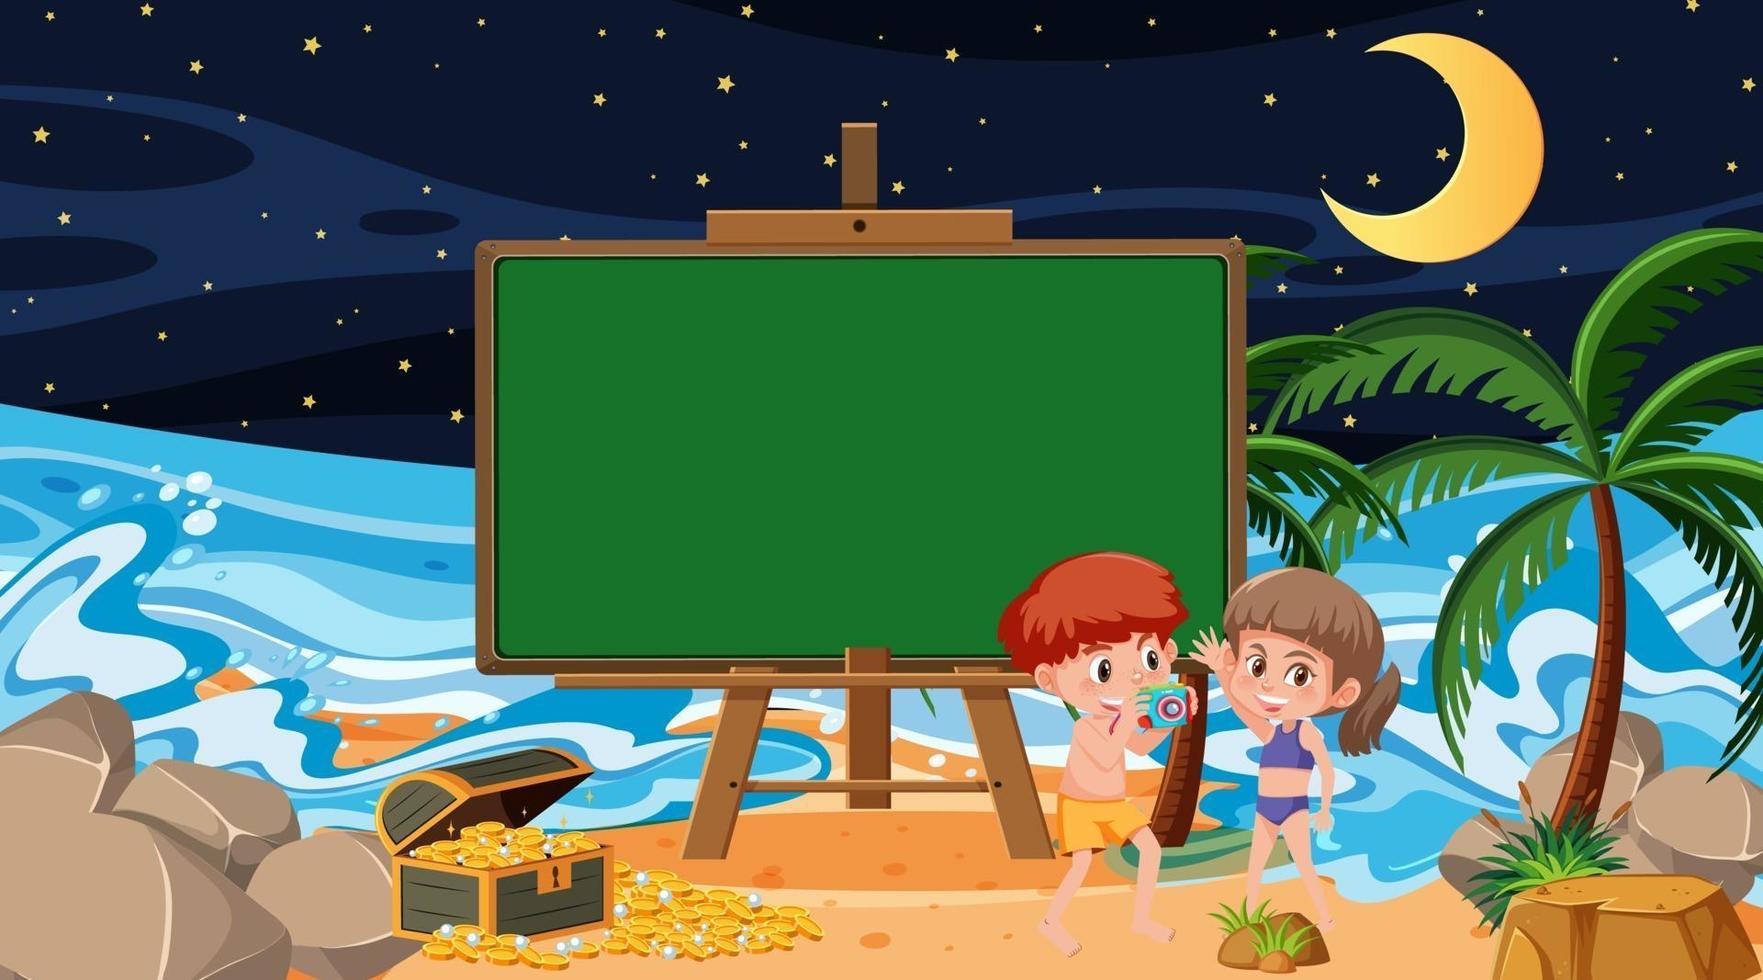 Kids on vacation at the beach night scene with an empty banner template vector